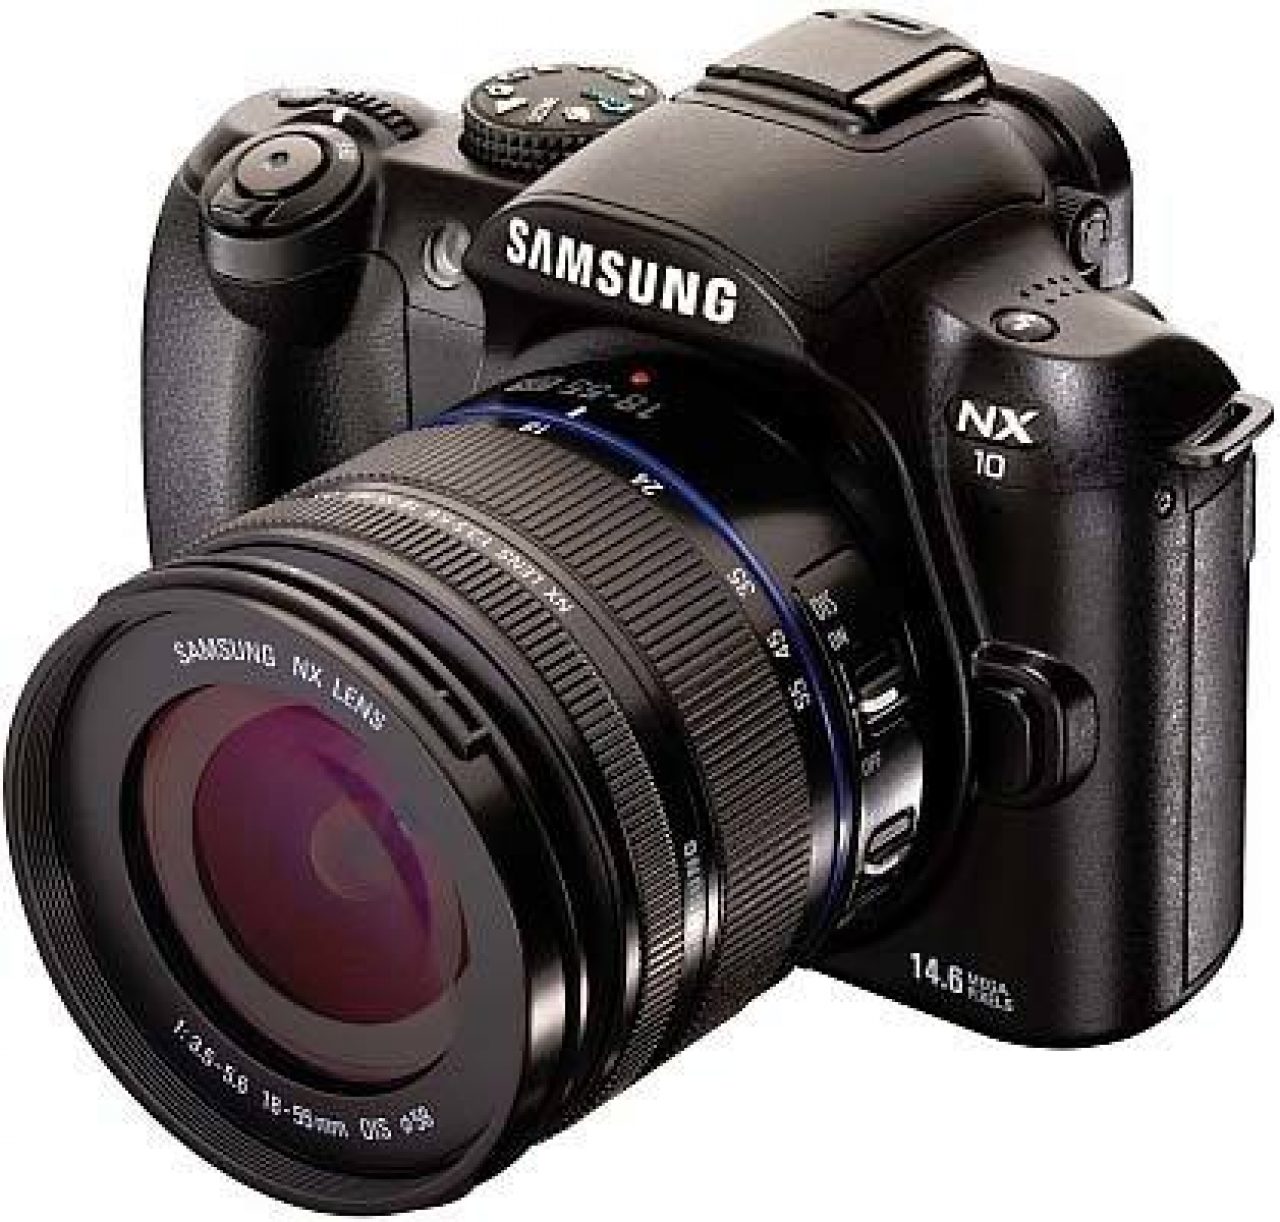 Opposite Travel agency air Samsung NX10 Review | Photography Blog